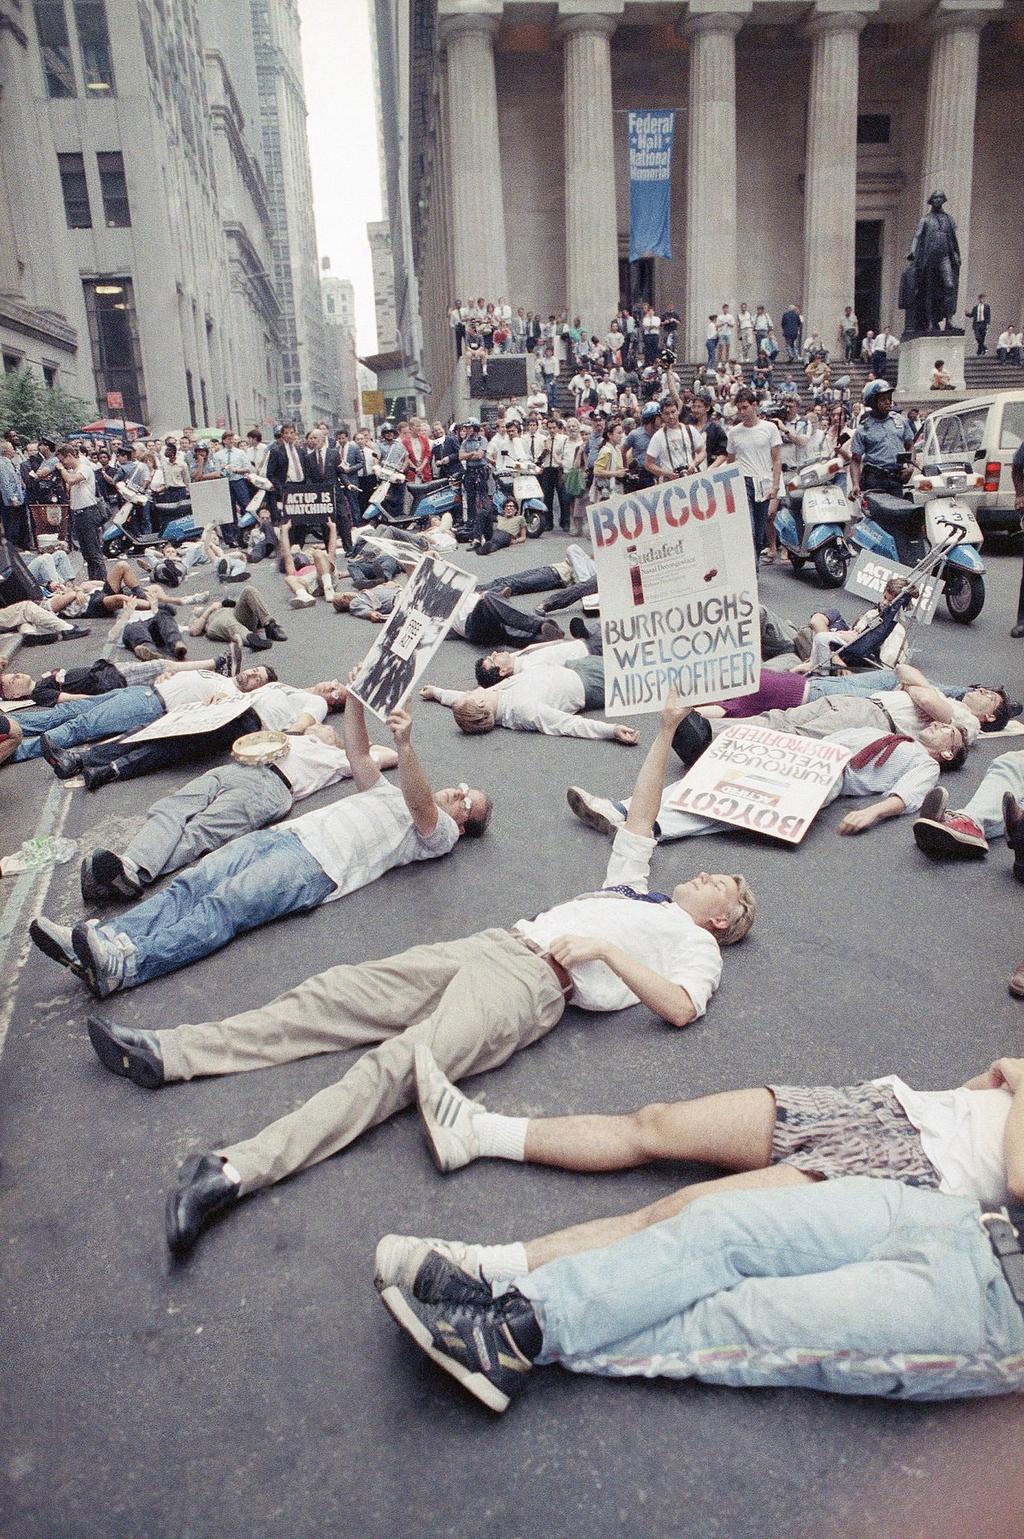 Demonstrators in front of the New York Stock Exchange in 1989 protesting the high cost of the AIDS drug AZT. The protest was organized by the militant group Act Up, of which Mr. Kramer was a founder 